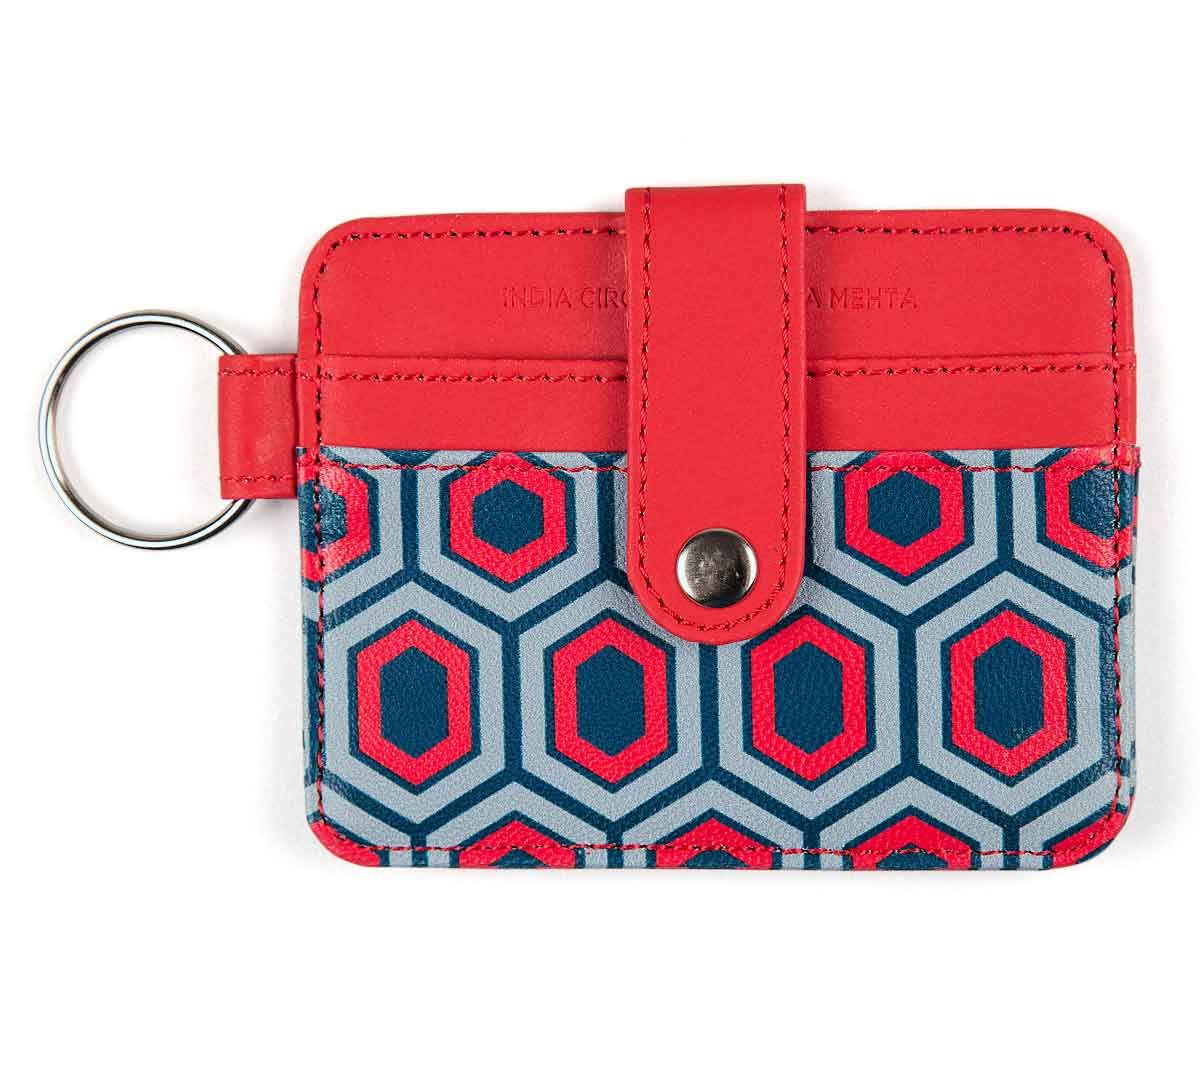 SUNICETY Slim Credit Card Holder Zipper Front Pocket Wallets Keychain for  Womens : Amazon.in: Bags, Wallets and Luggage